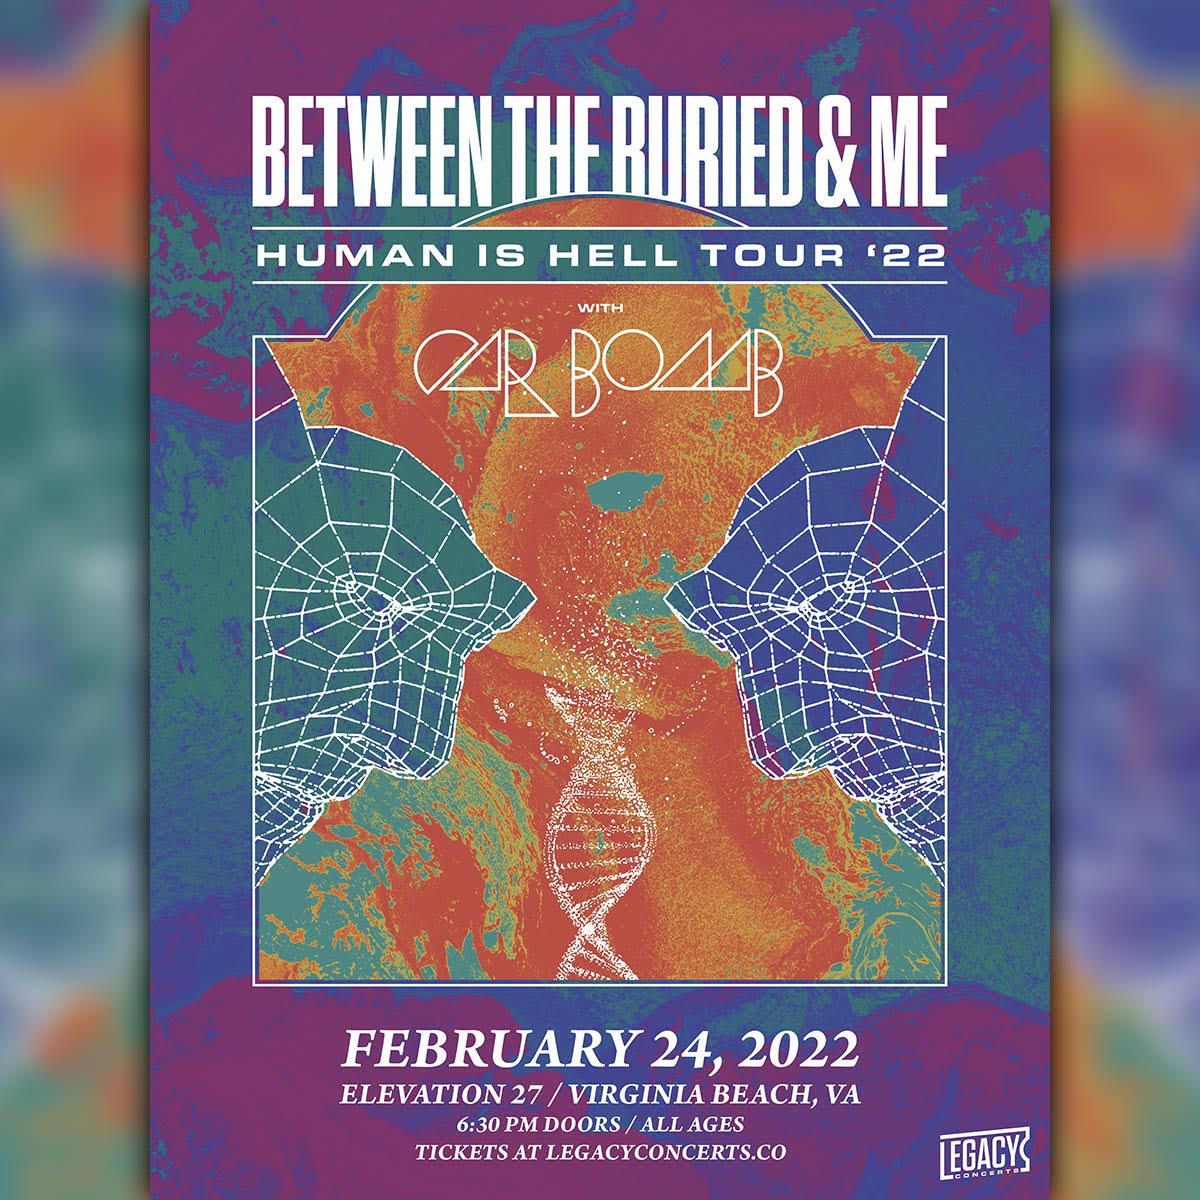 Buy Tickets to Between the Buried and Me Human Is Hell Tour '22 in